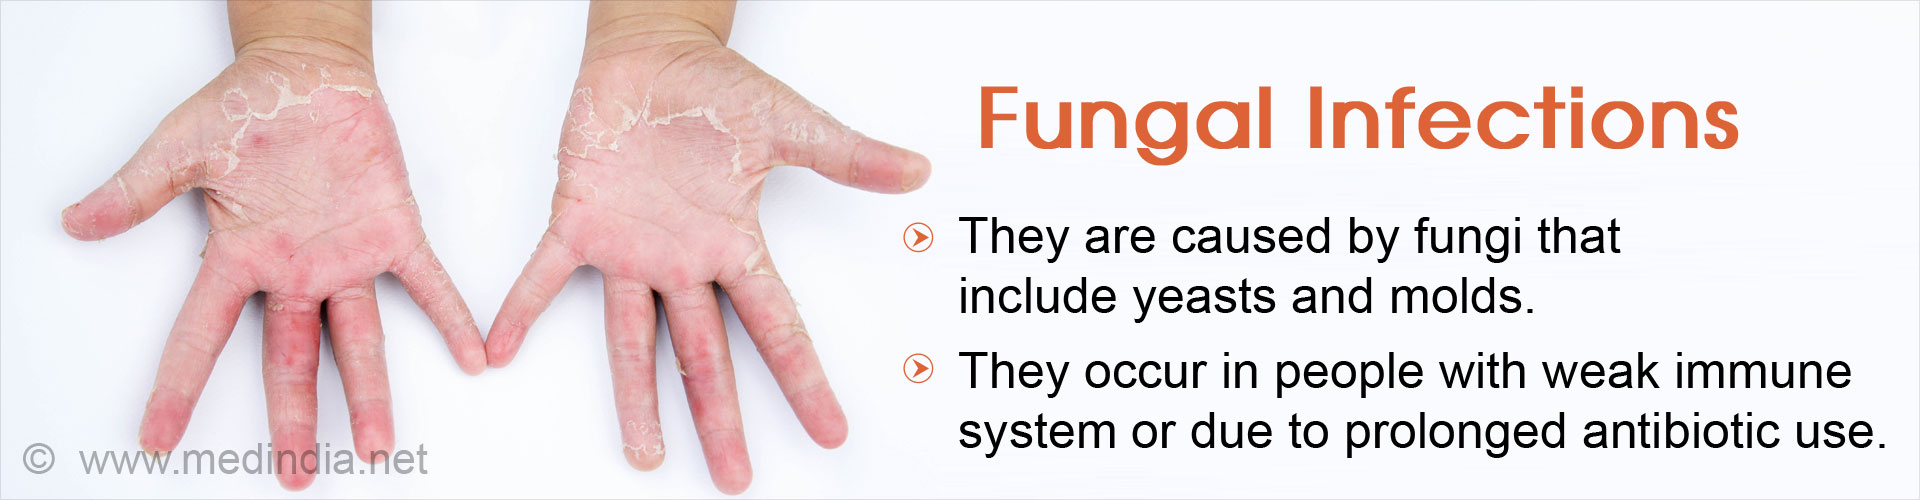 Fungal Infections Causes, Symptoms, Diagnosis, Treatment & Prevention